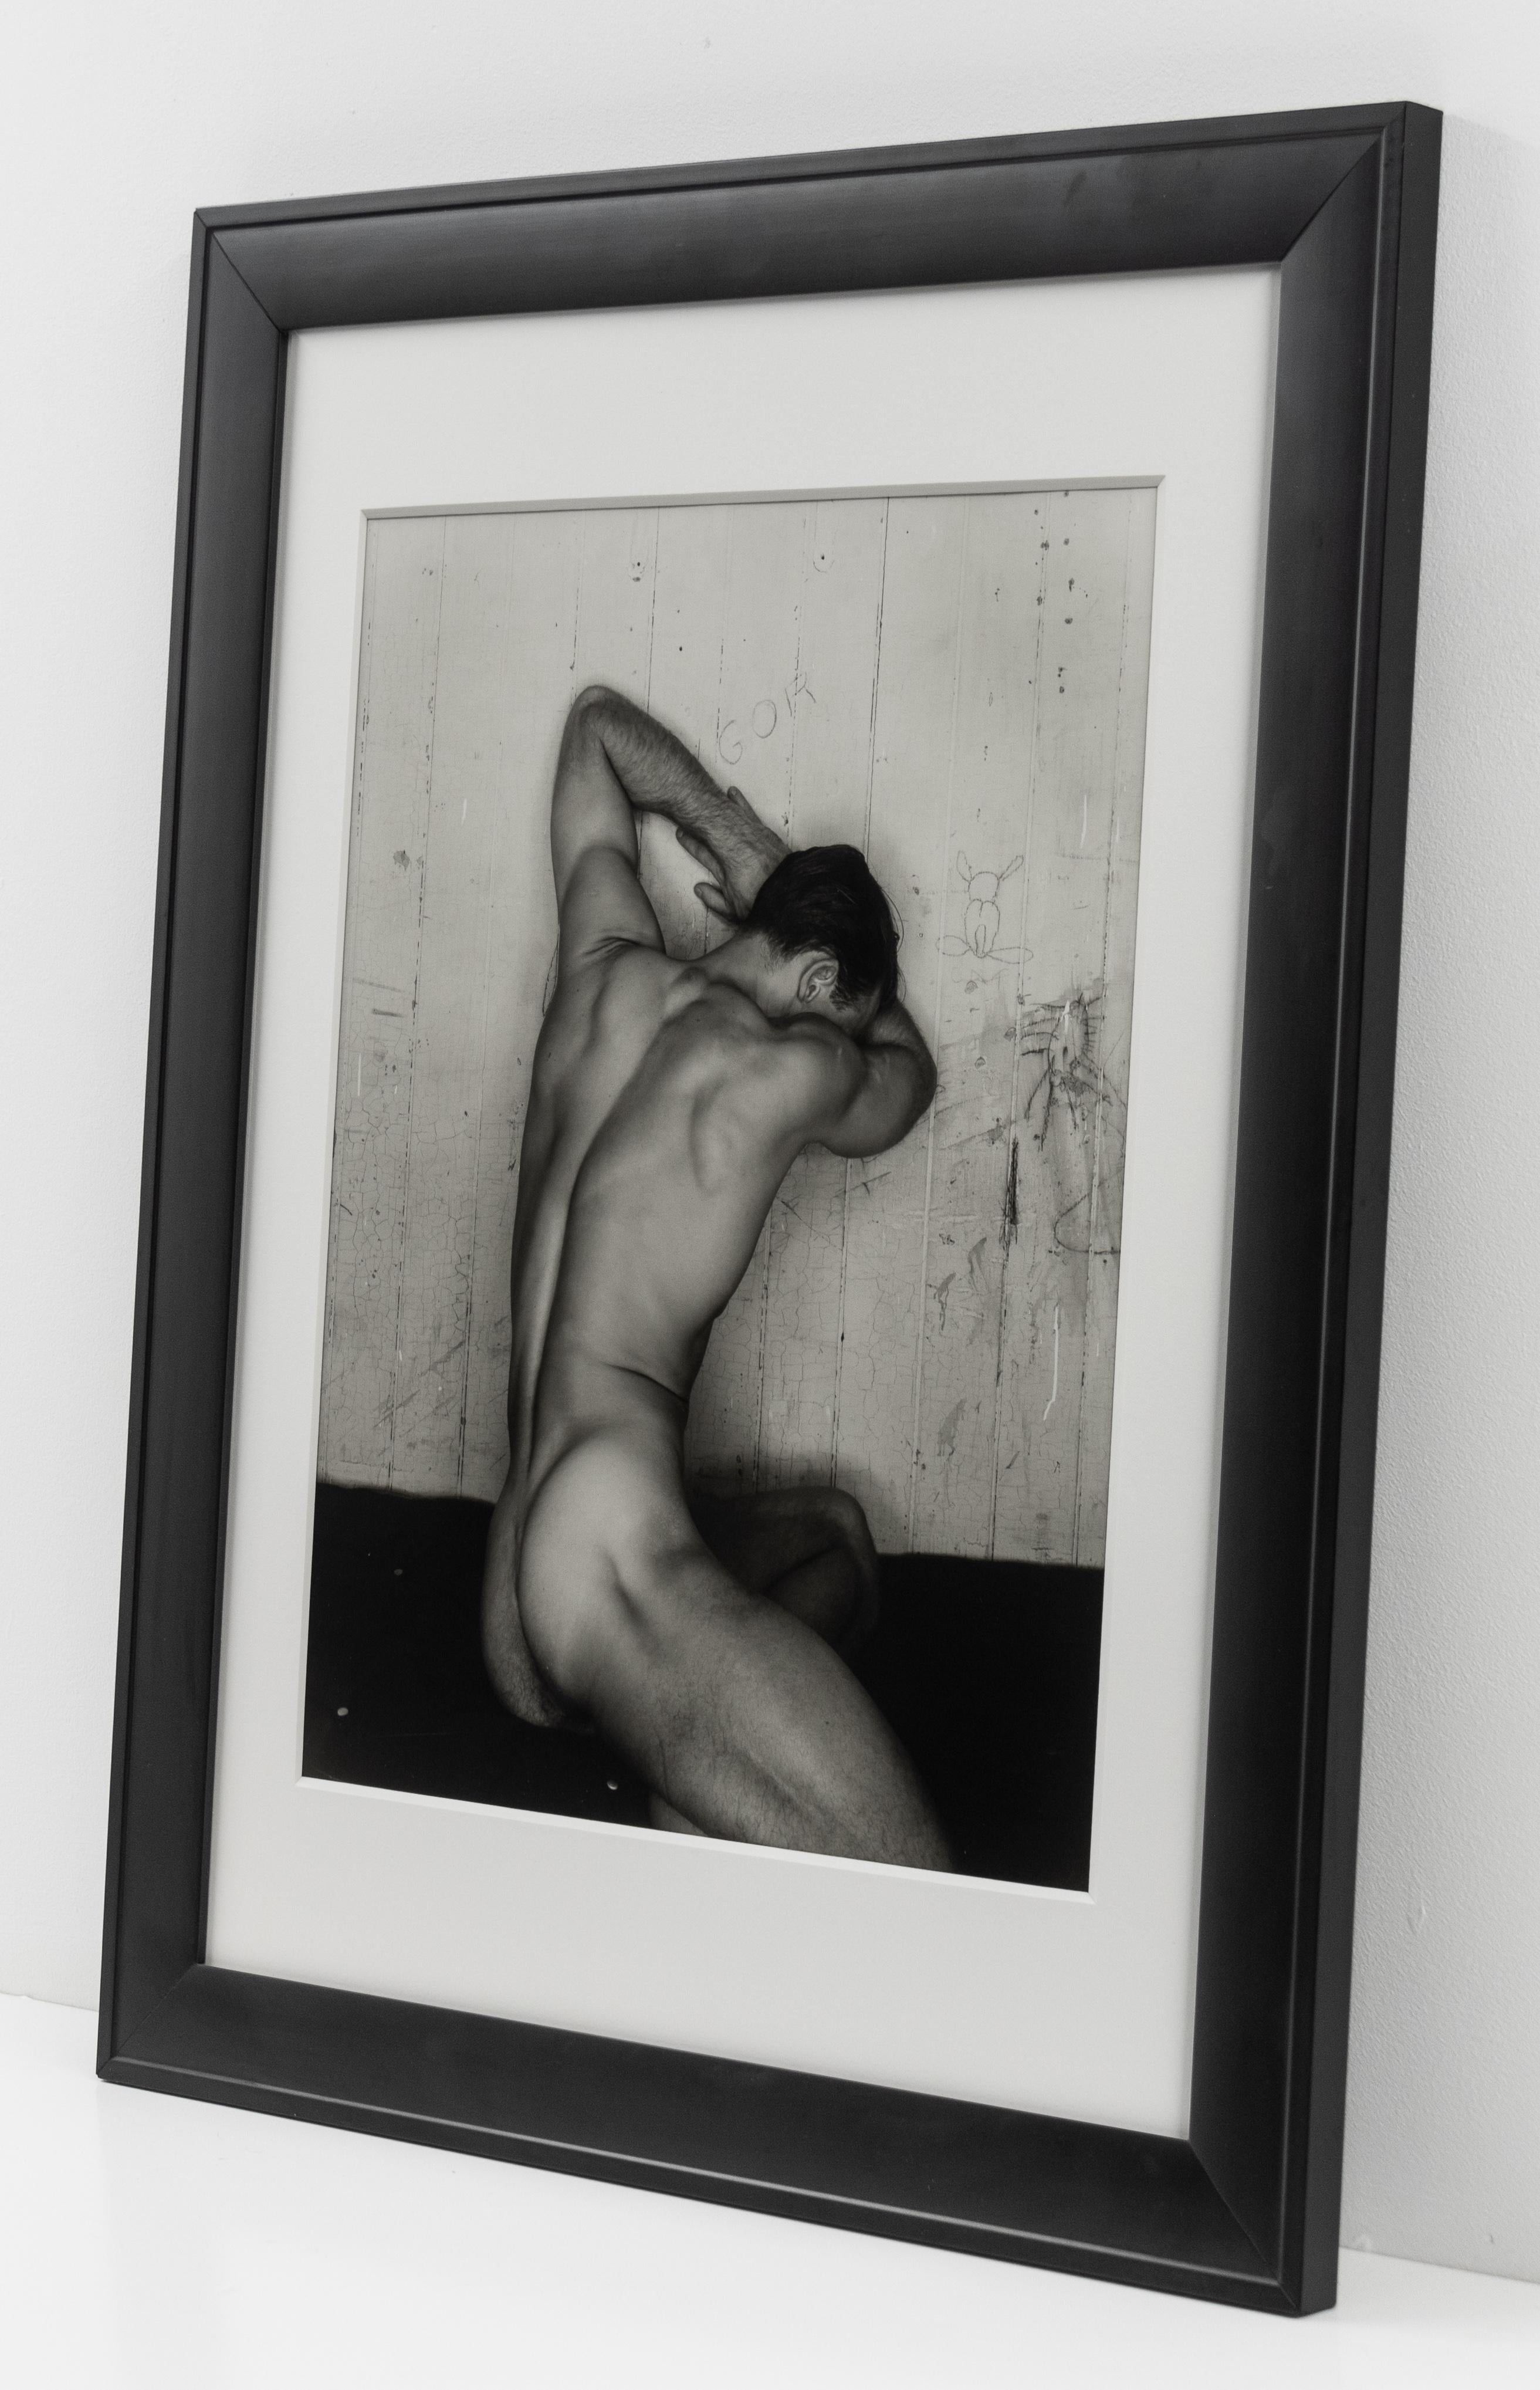 This photograph by George Platt Lynes is offered by CLAMP in New York City.

Gordon Hanson
1954/printed later

Gelatin silver print

20 x 16 inches

$3,750